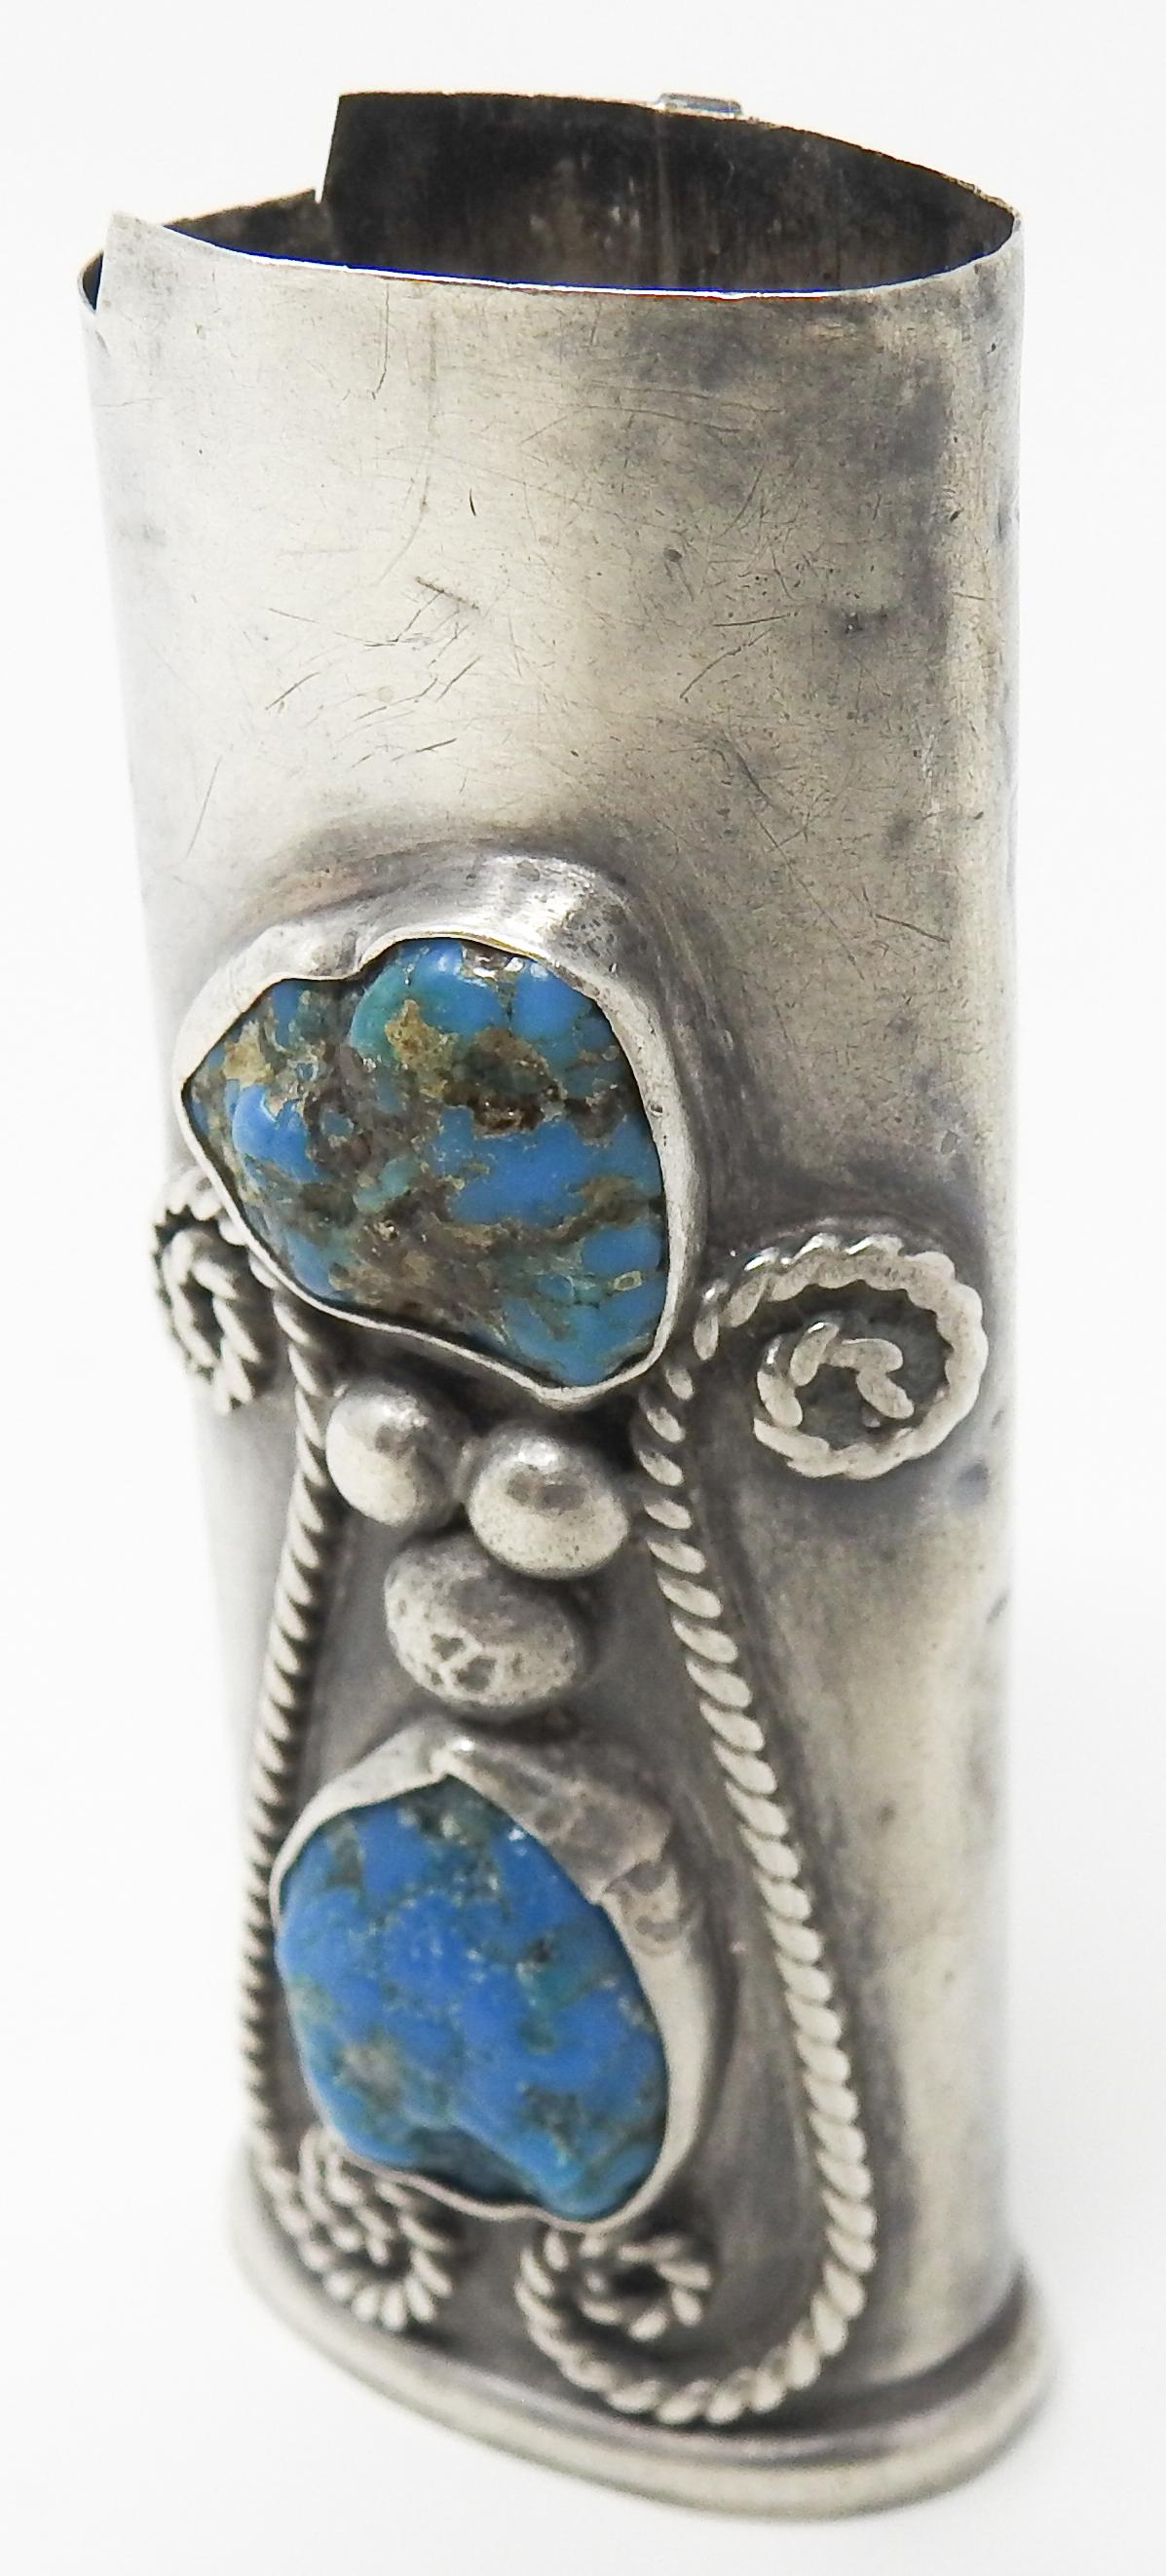 Offering this handsome sterling silver and turquoise lighter case. The front has two big stones of turquoise that are set with 3 balls in between them and scrollwork, spiral filigree to either side. You can tell this piece is hand crafted and the